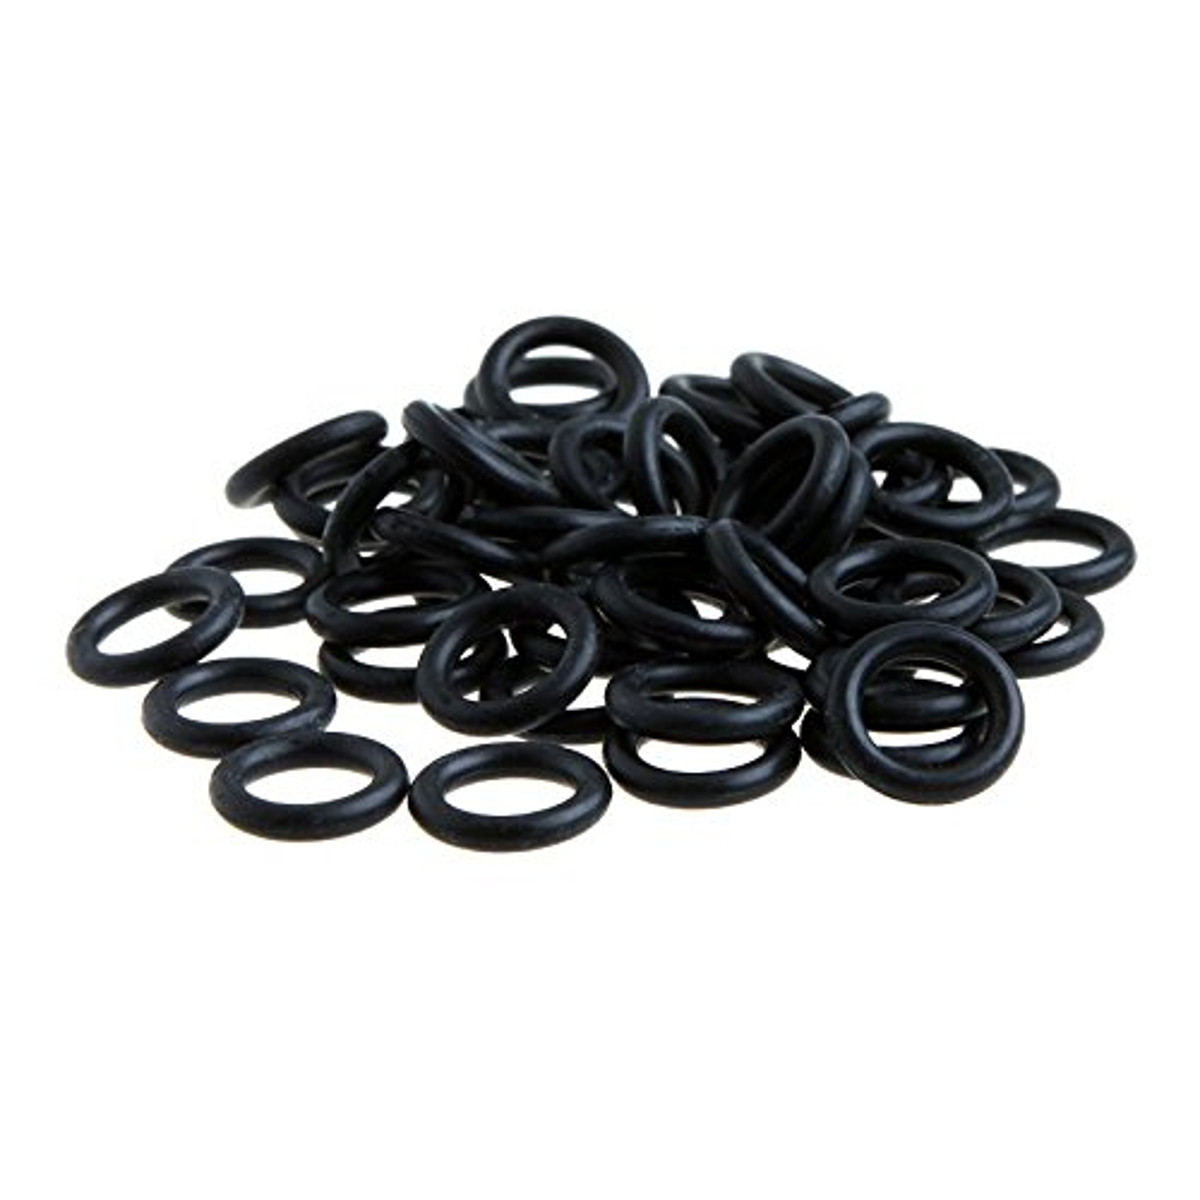 100 Mechanical Keyboard Keycap Rubber O-Ring Switch Dampeners for Cherry MX 7